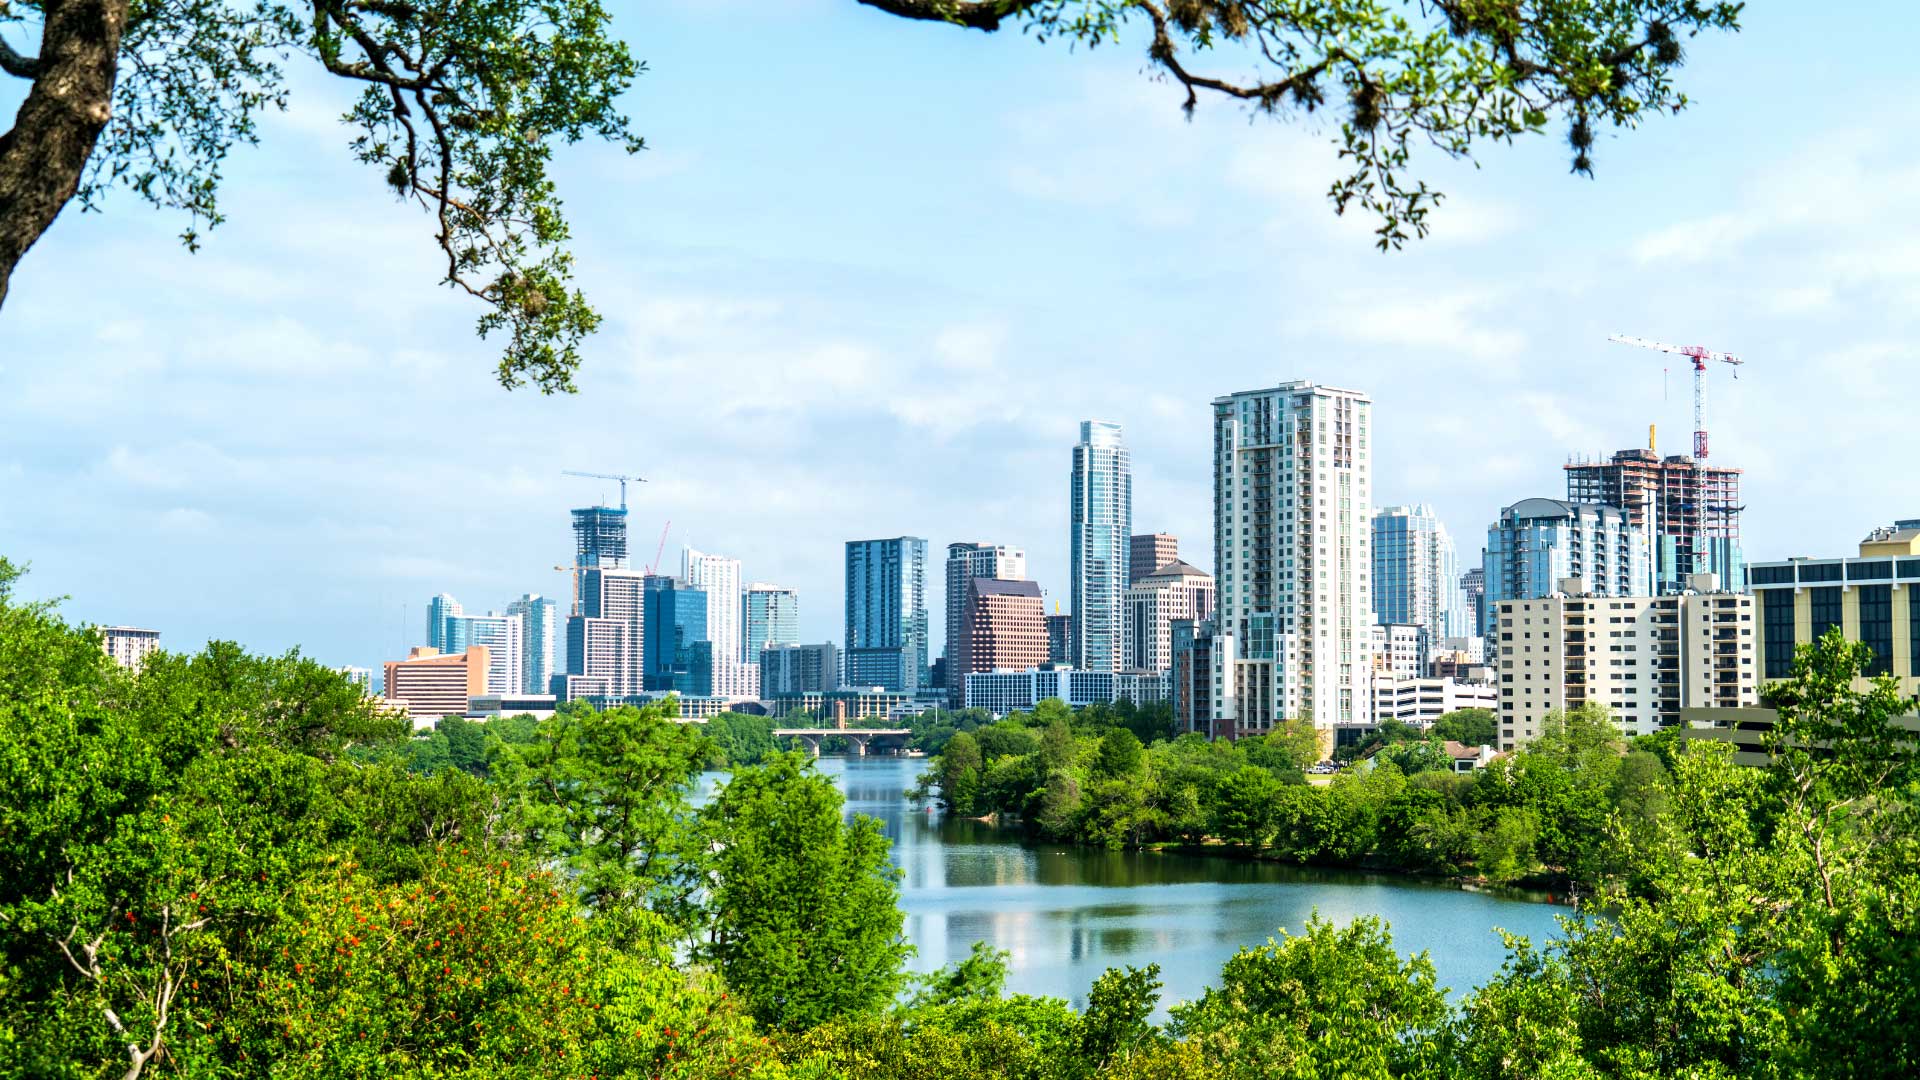 Austin Texas population: What massive growth means for city, housing